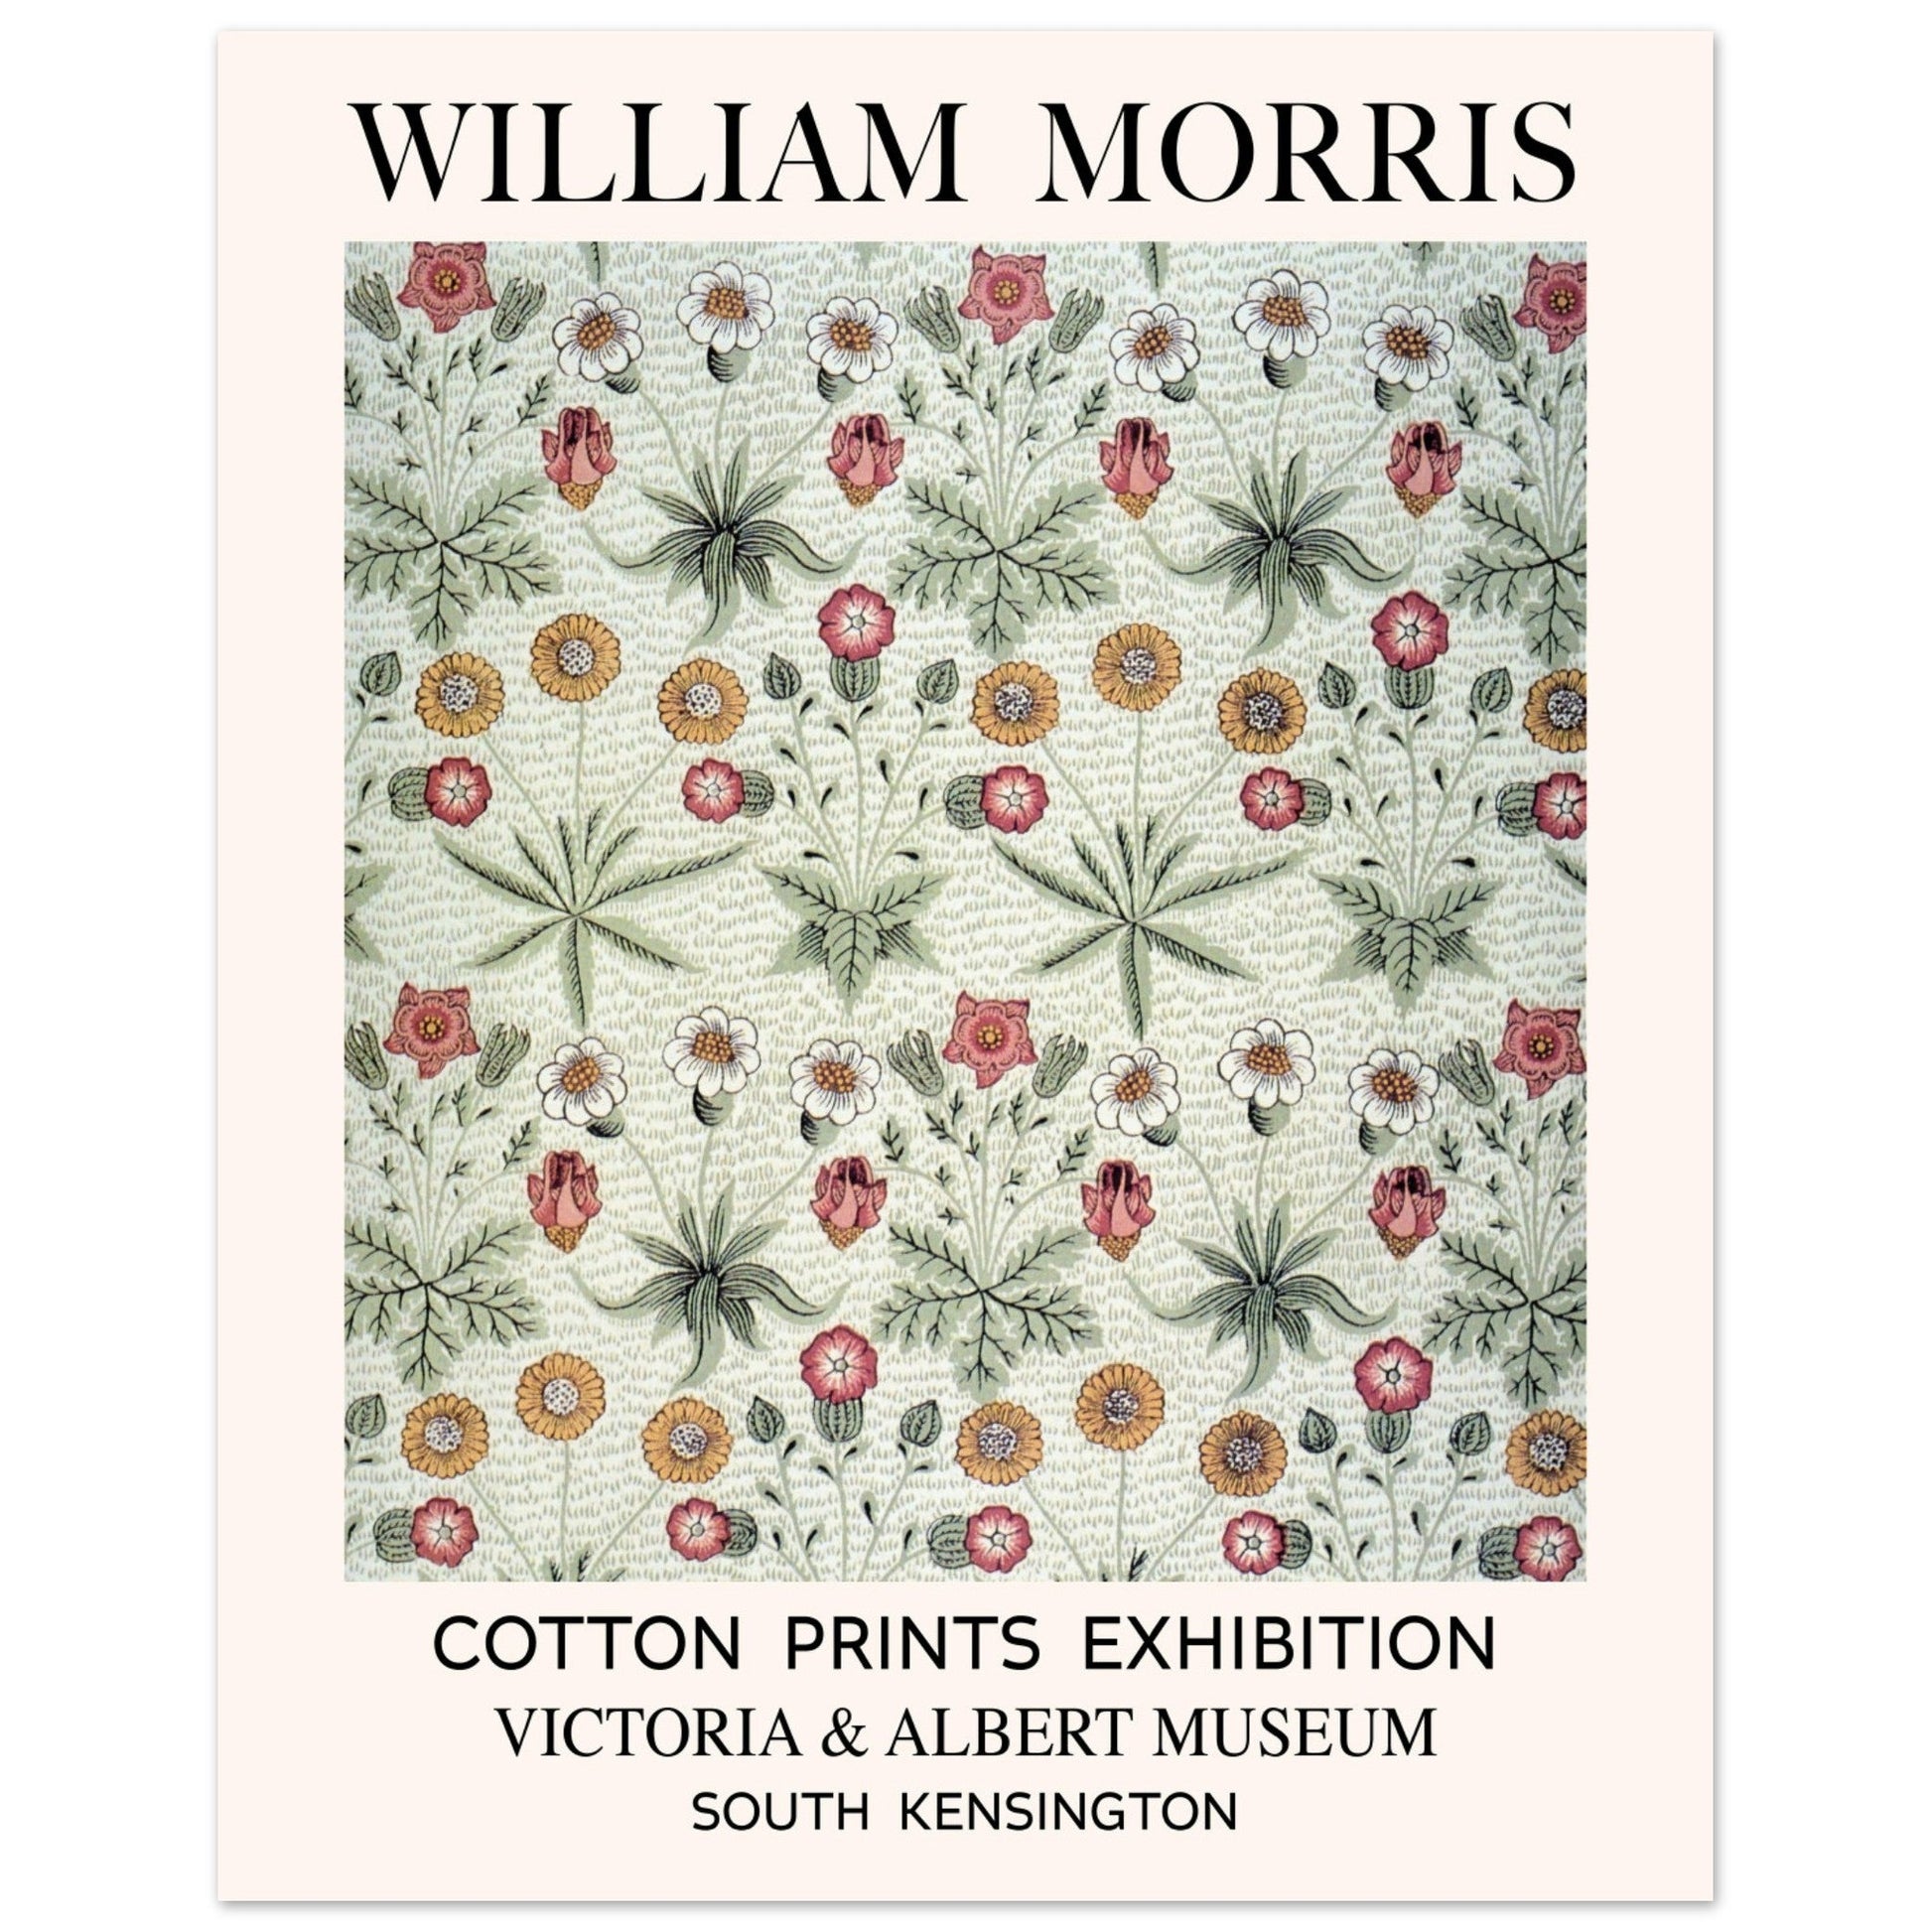 William Morris - Daisy, Art Nouveau, British Wall Paper, Floral Background, #illieeart